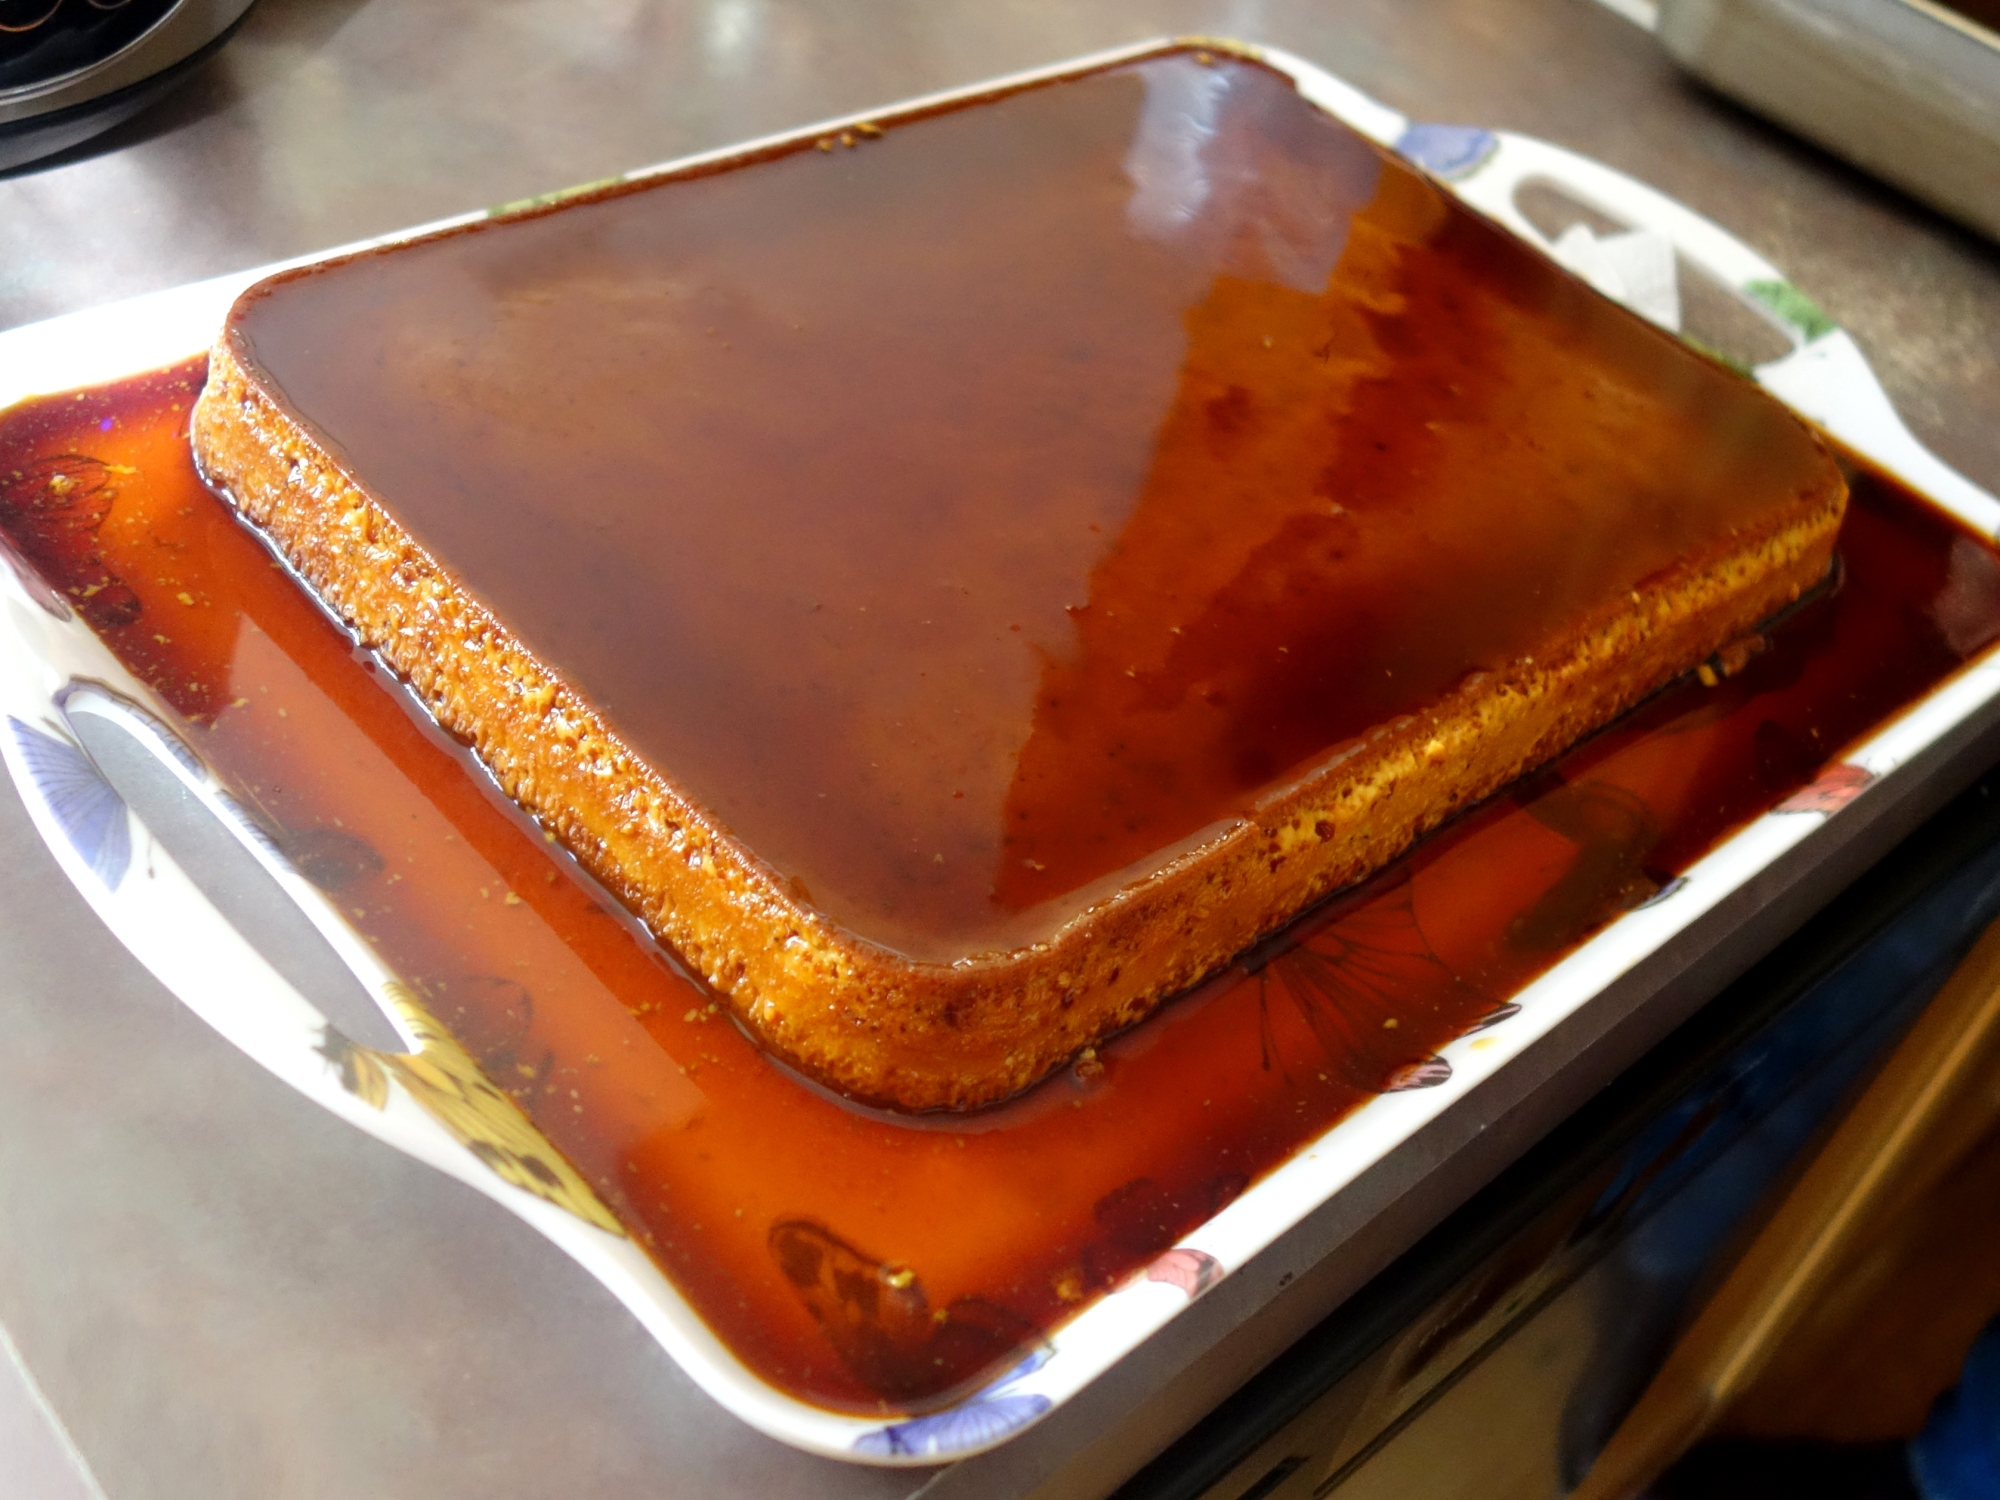 Flan - take 3... third time's a charm! Mother's Day flan